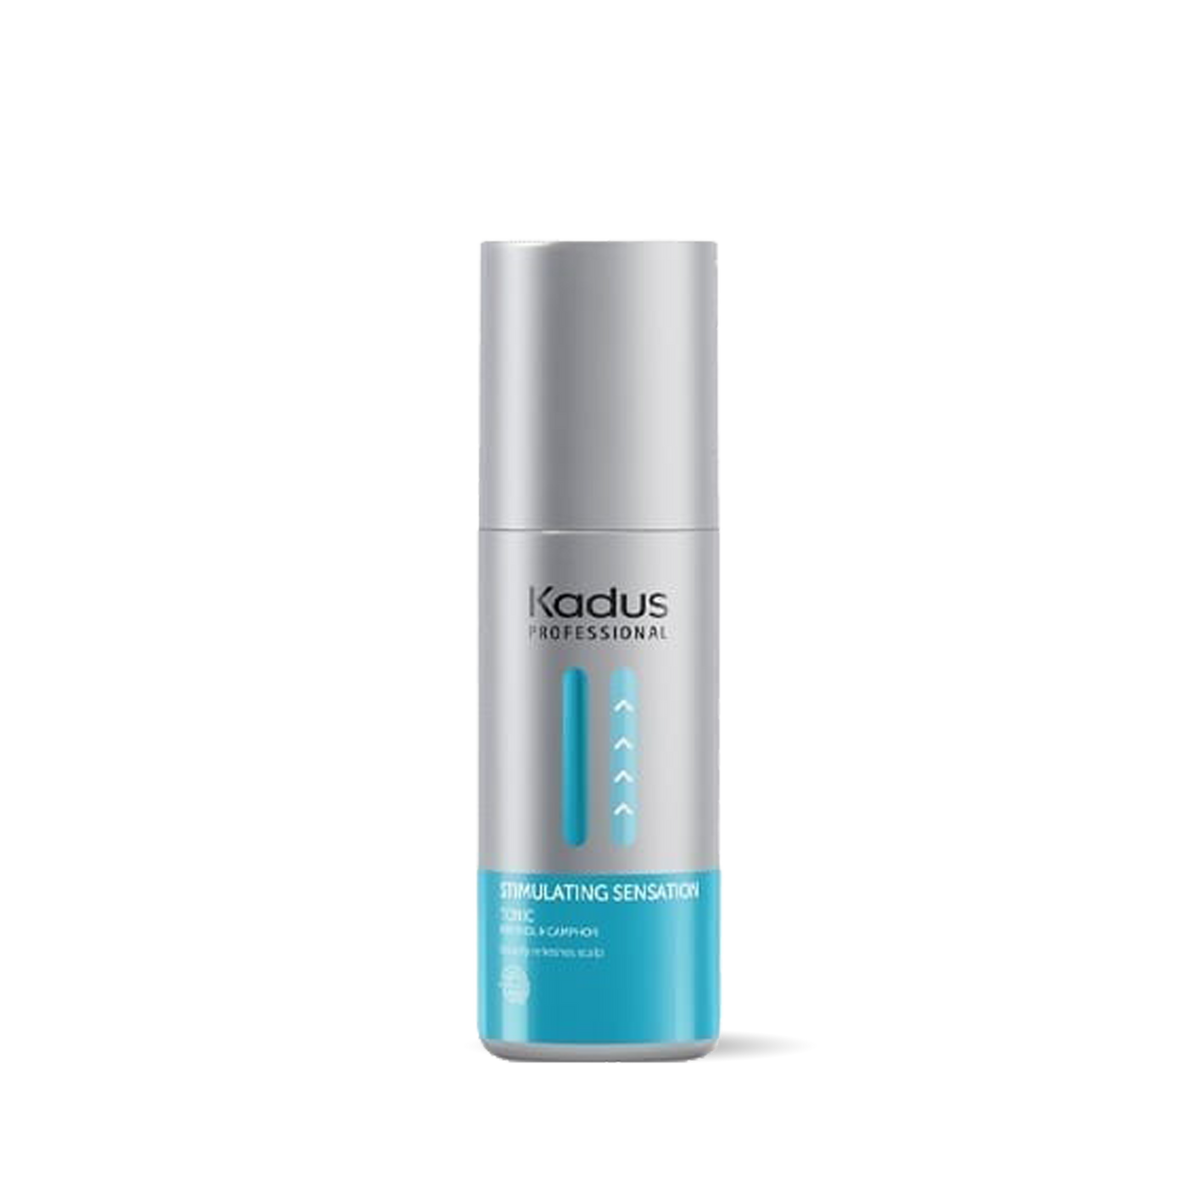 Kadus Stimulating Sensation Leave-In Tonic 150ml - by Kadus Professionals |ProCare Outlet|